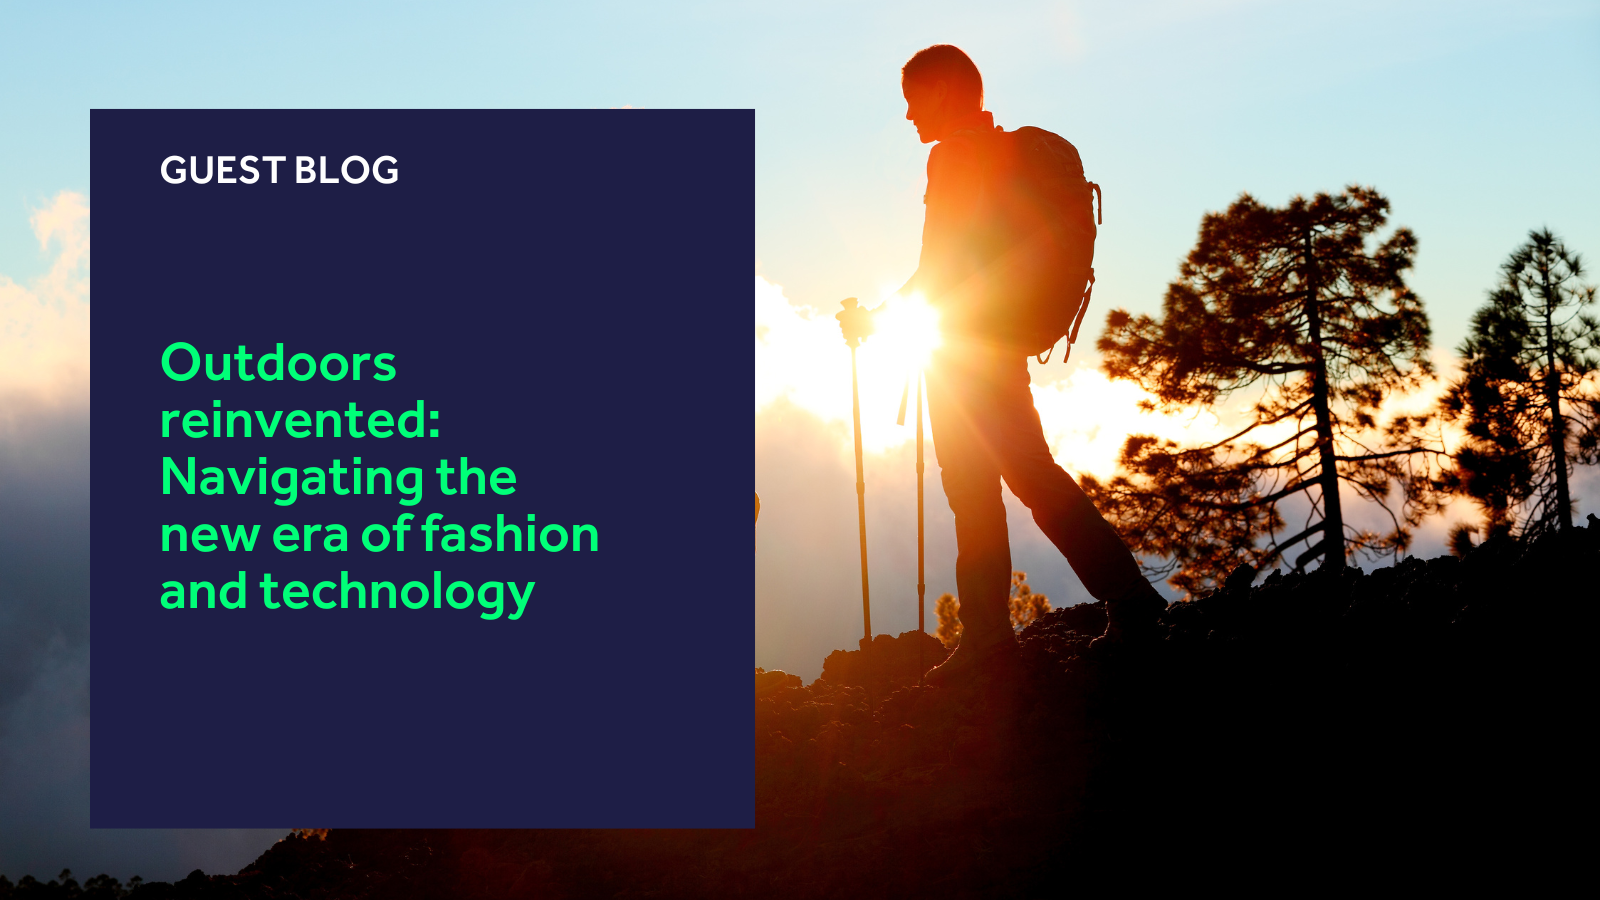 Outdoors reinvented: Navigating the new era of fashion and technology blog header